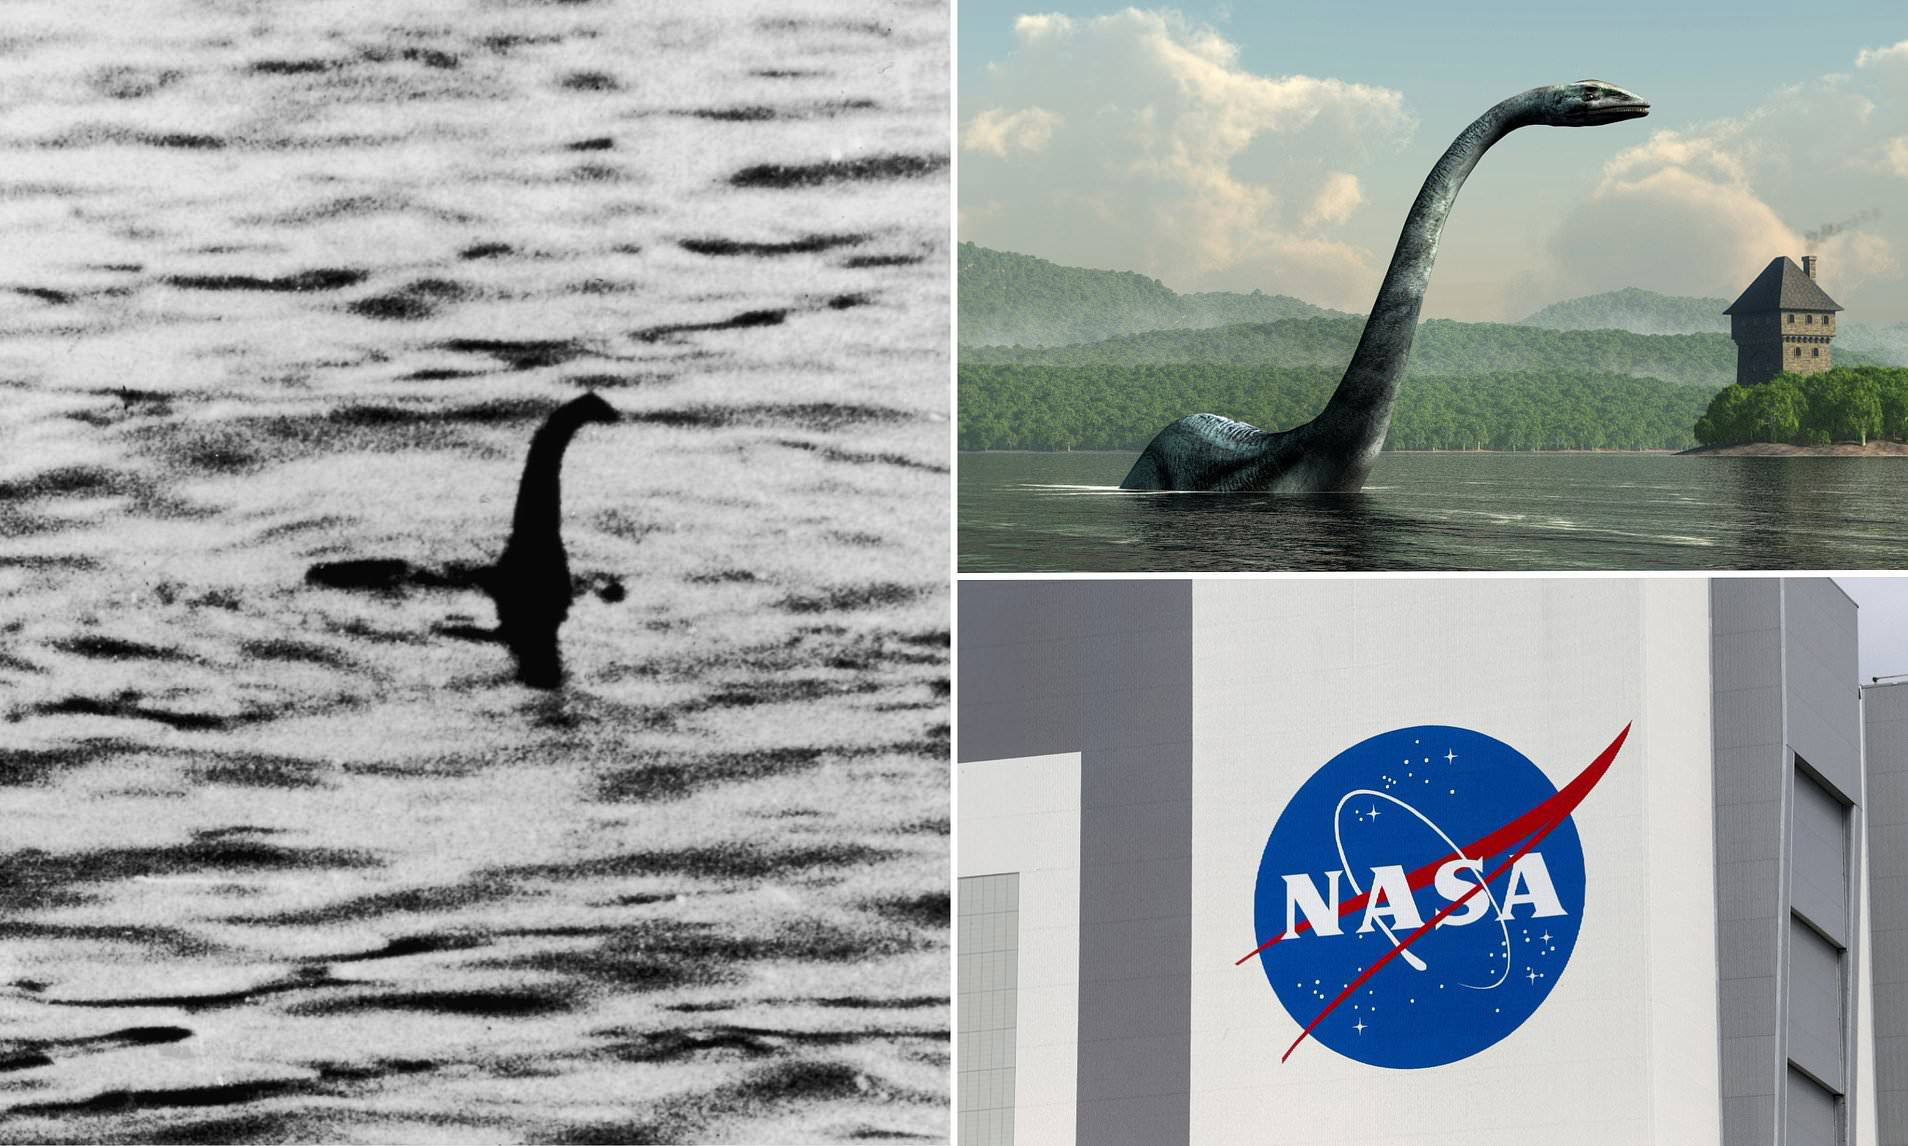 NASA has been asked to help search for the elusive Loch Ness Monster